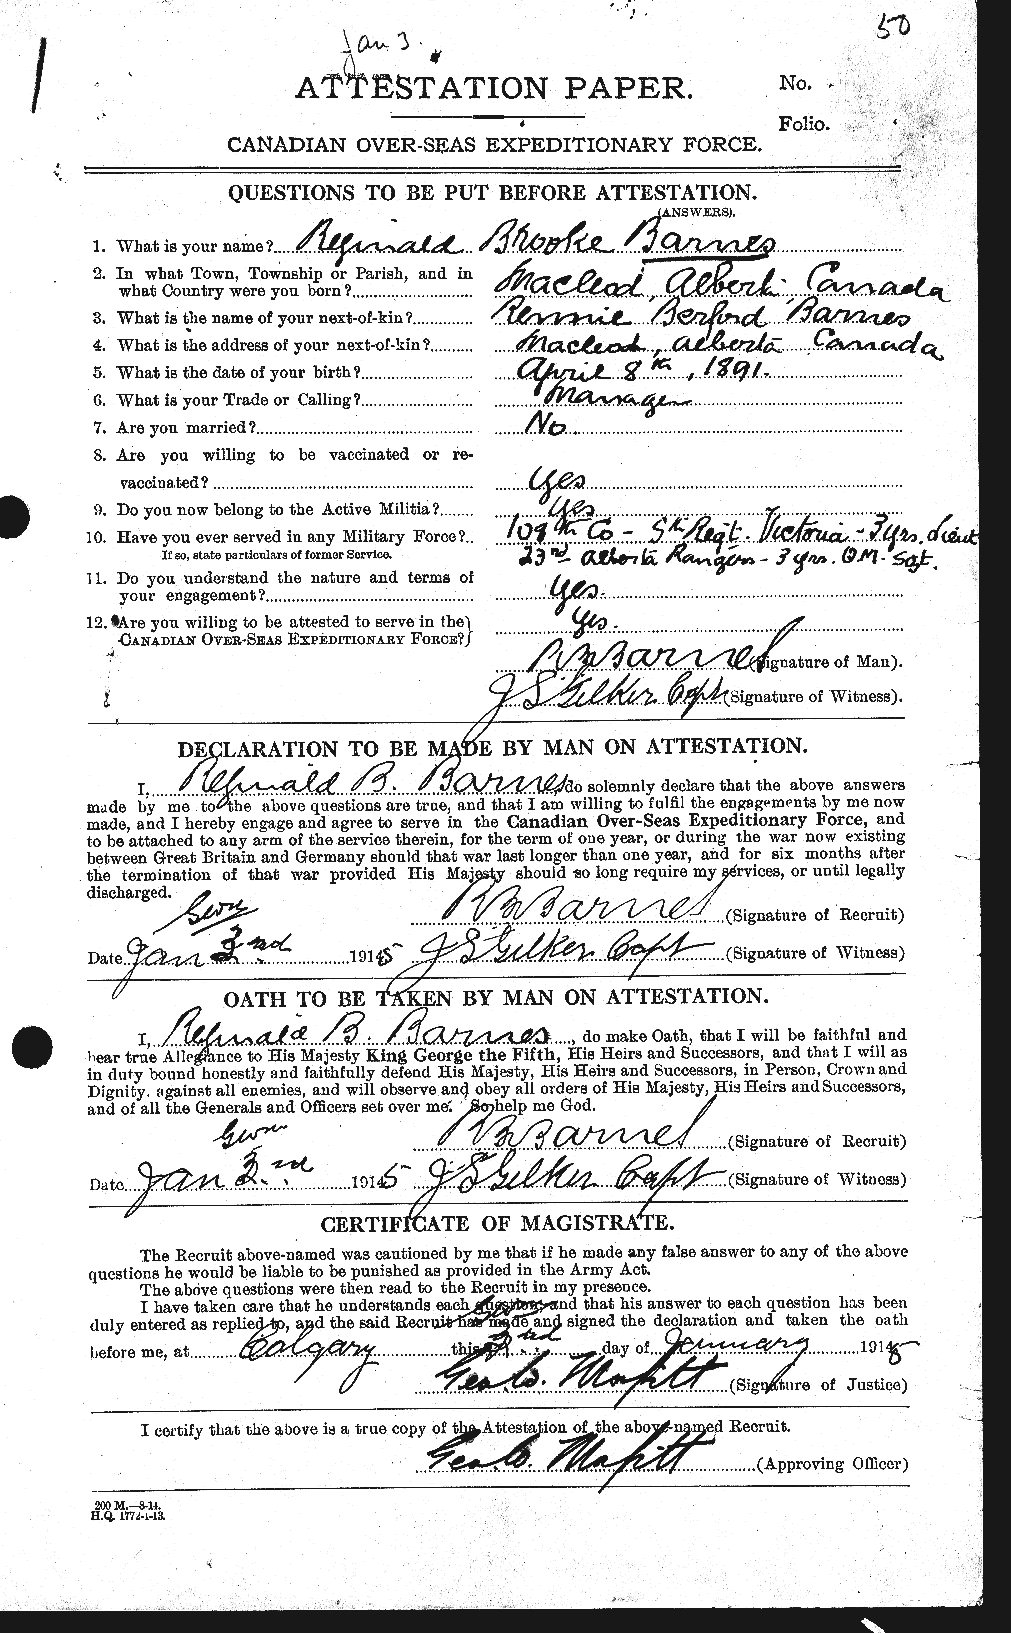 Personnel Records of the First World War - CEF 227387a